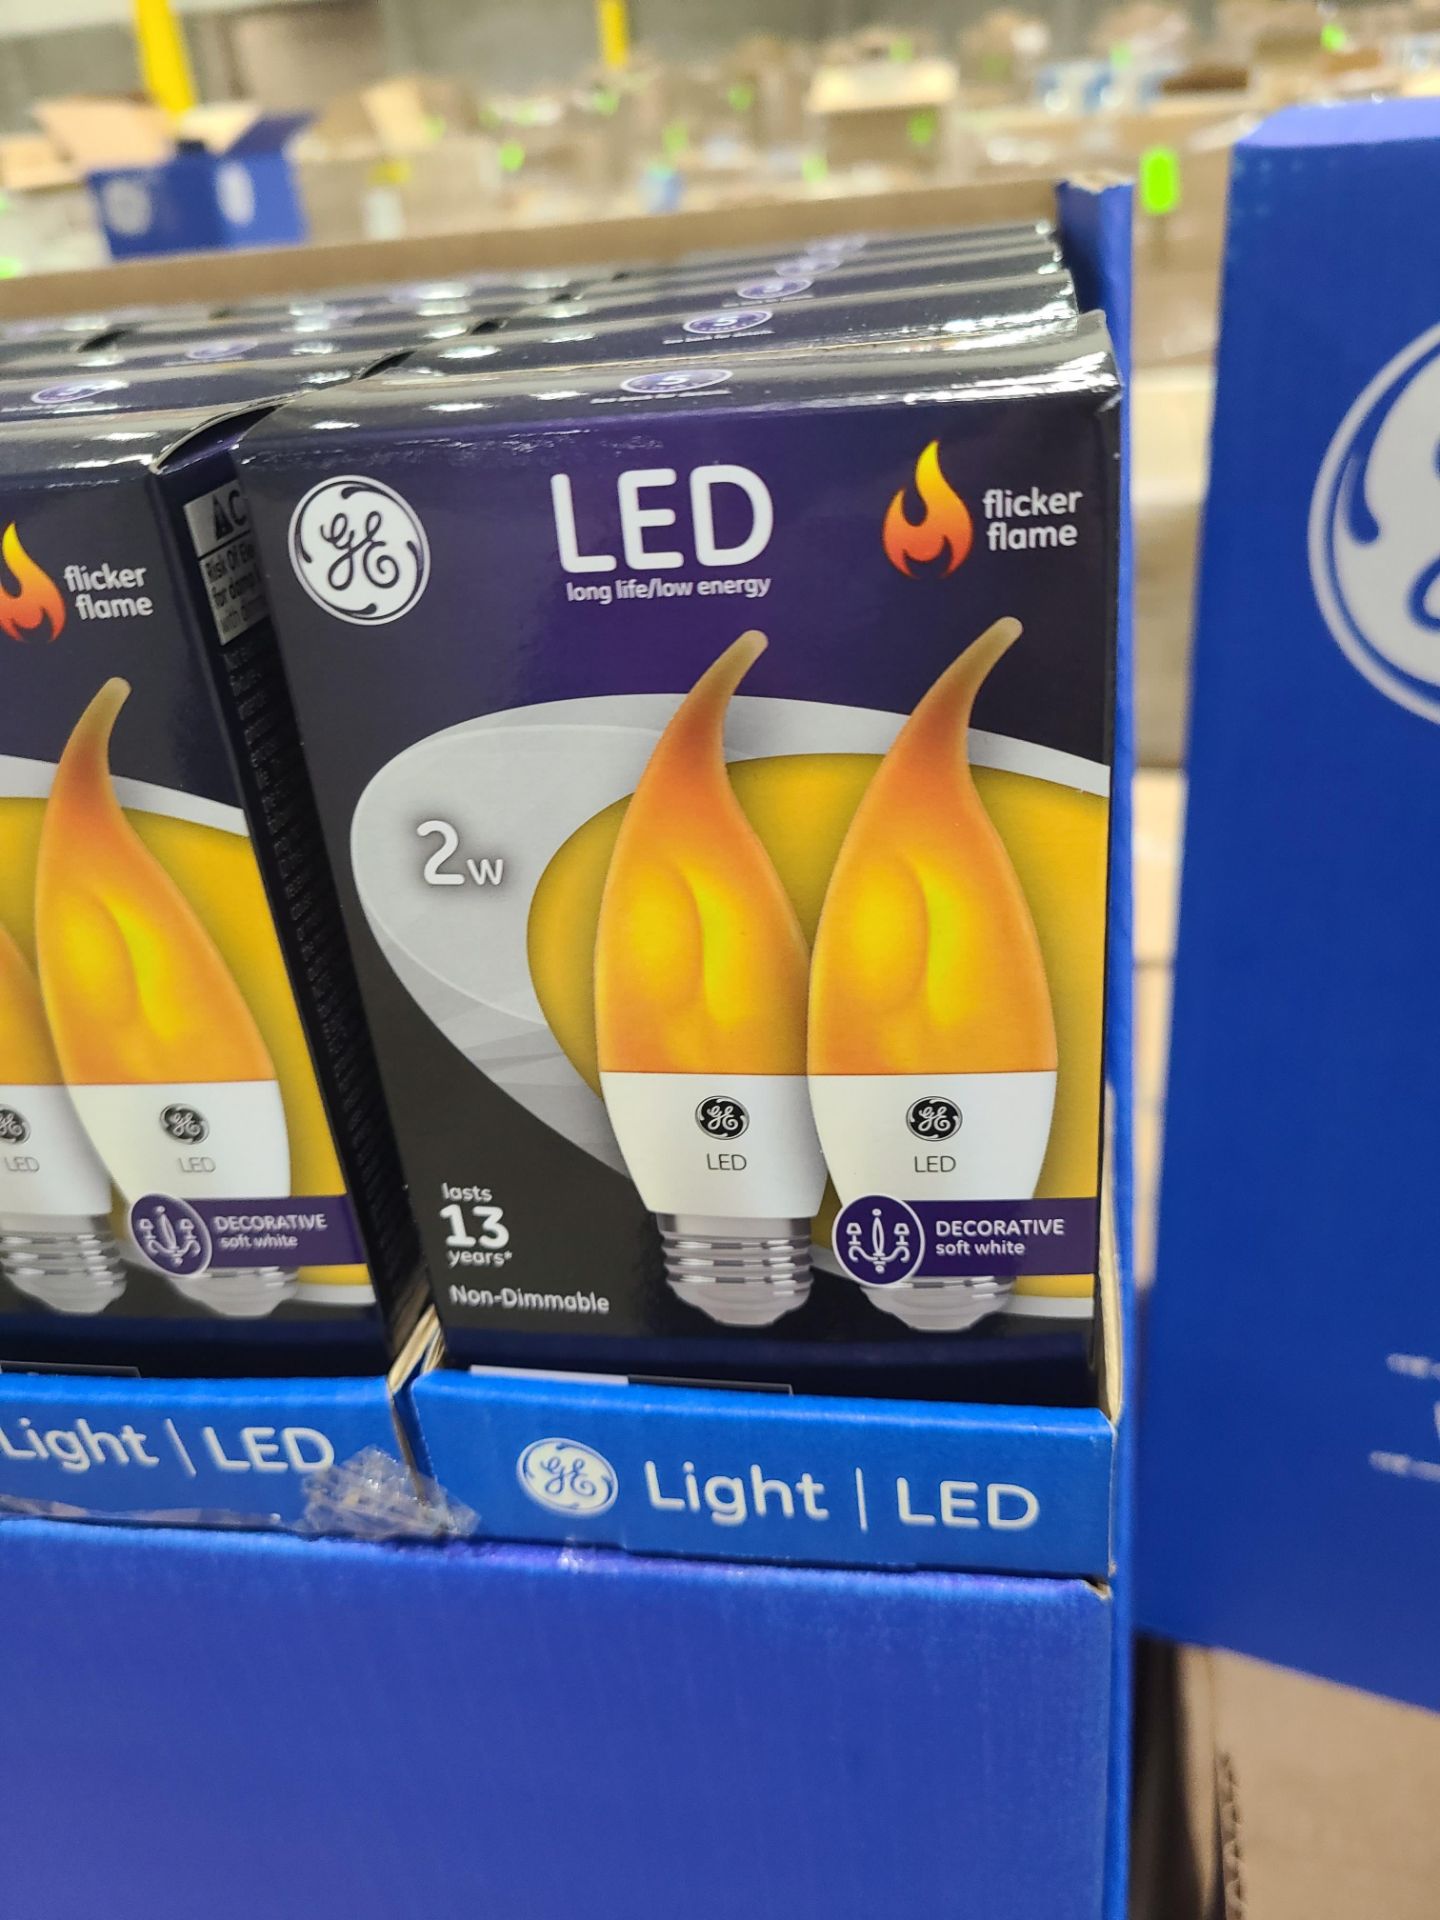 (768) GE LED FLICKER FLAME WARM CANDLE LIGHT BULB - Image 2 of 2